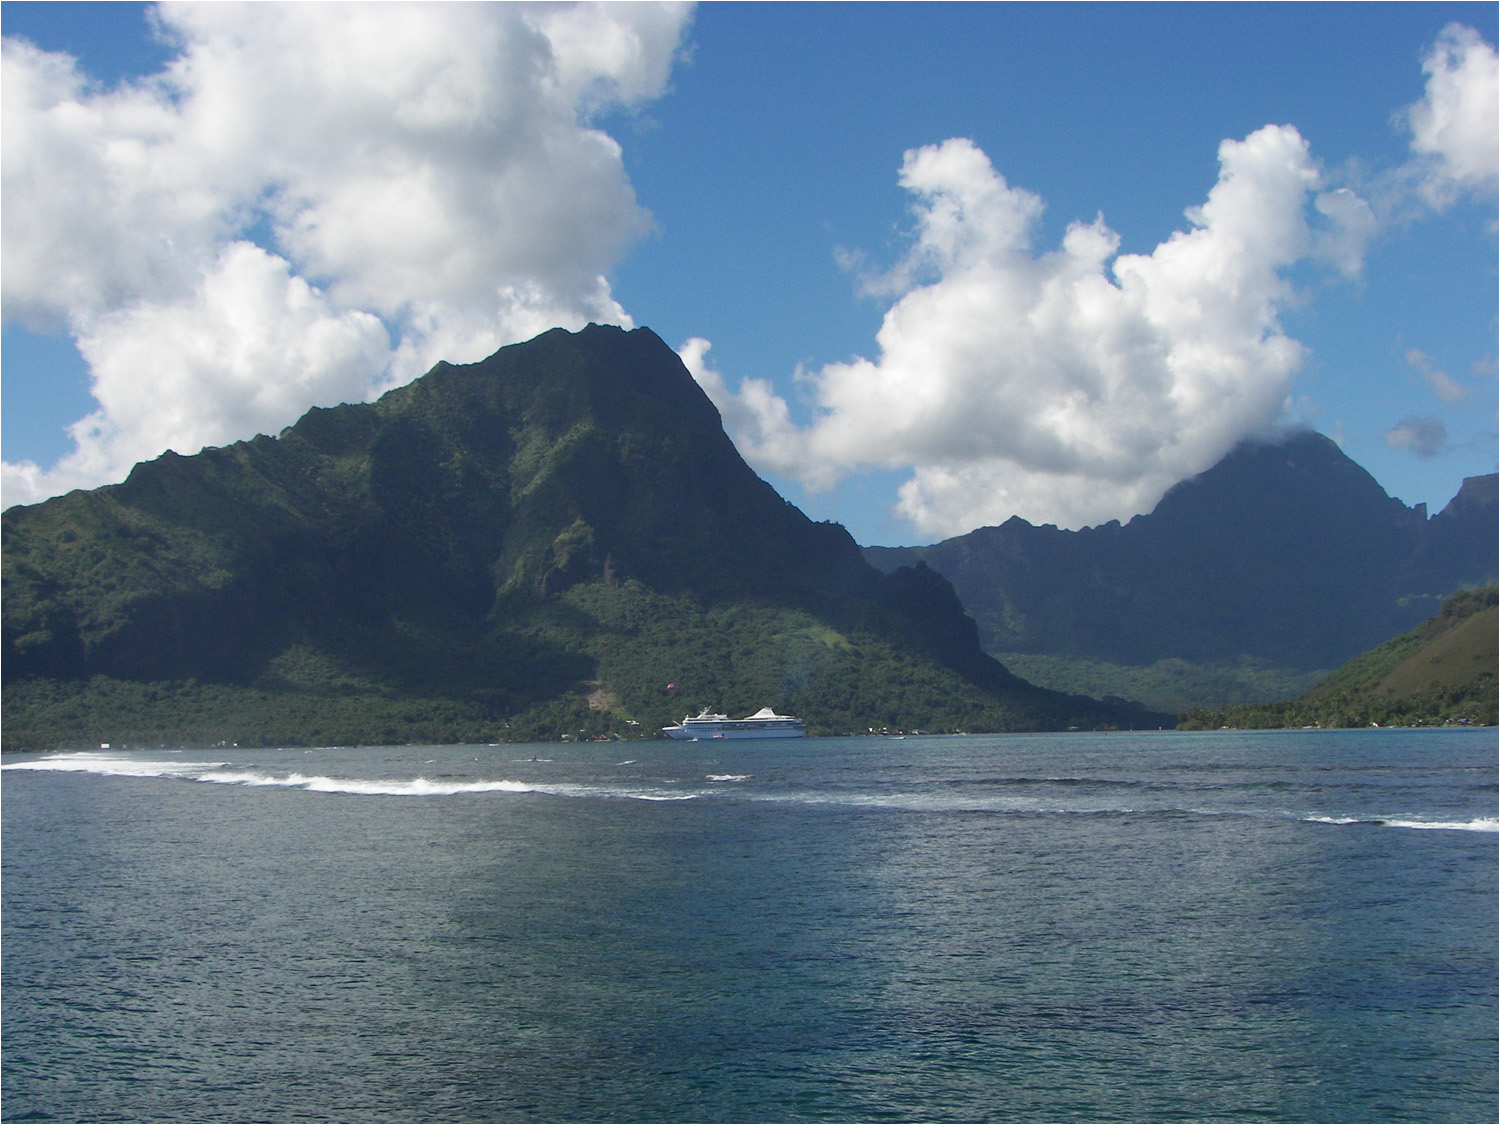 Looking back at the island of Moorea and lagoon from the ocean side of the reef.